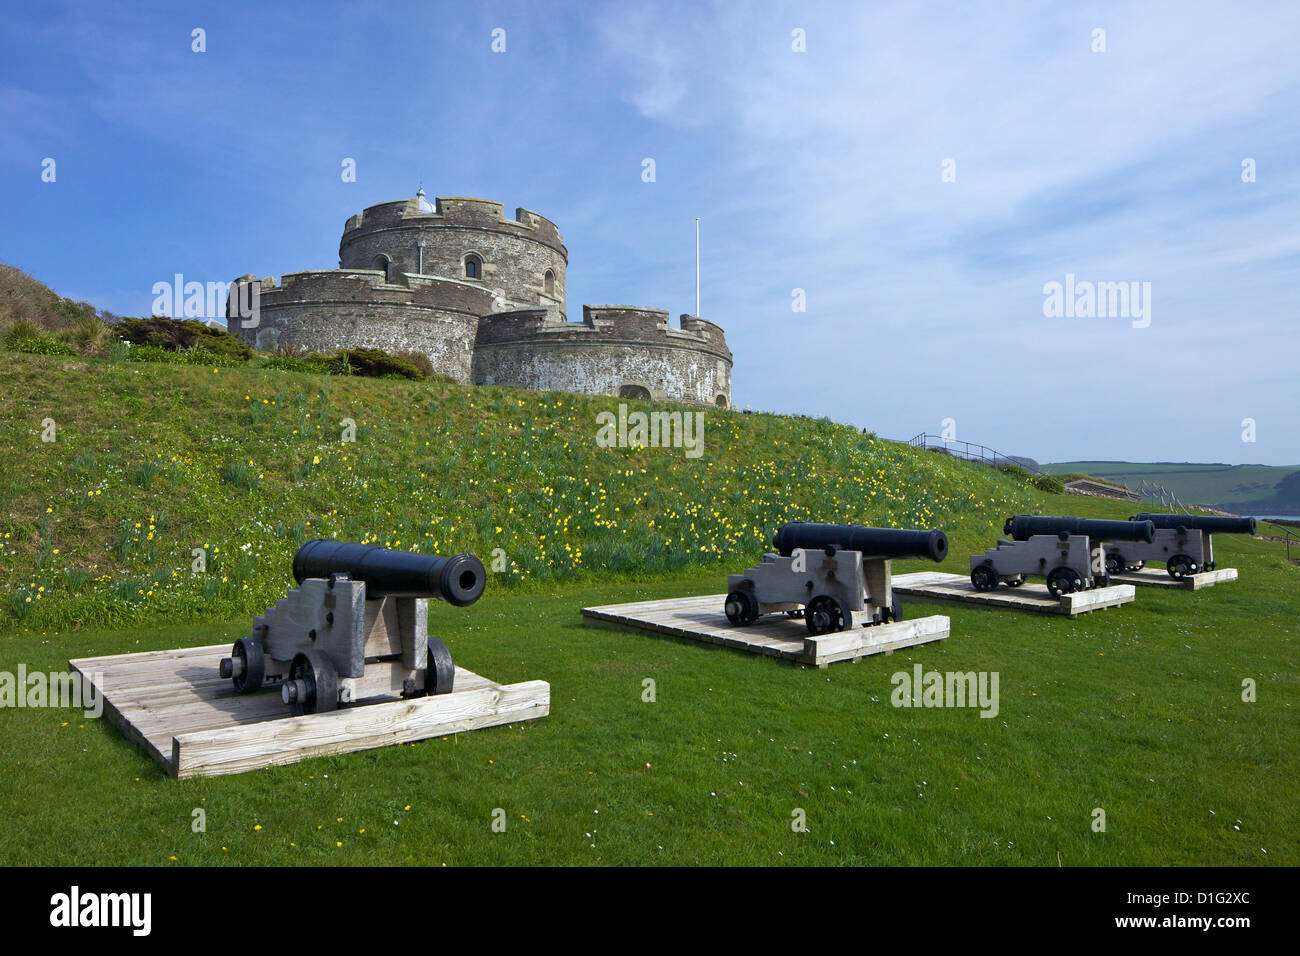 St. Mawes Castle, an artillery fortress built by Henry VIII, Cornwall, England, United Kingdom, Europe Stock Photo